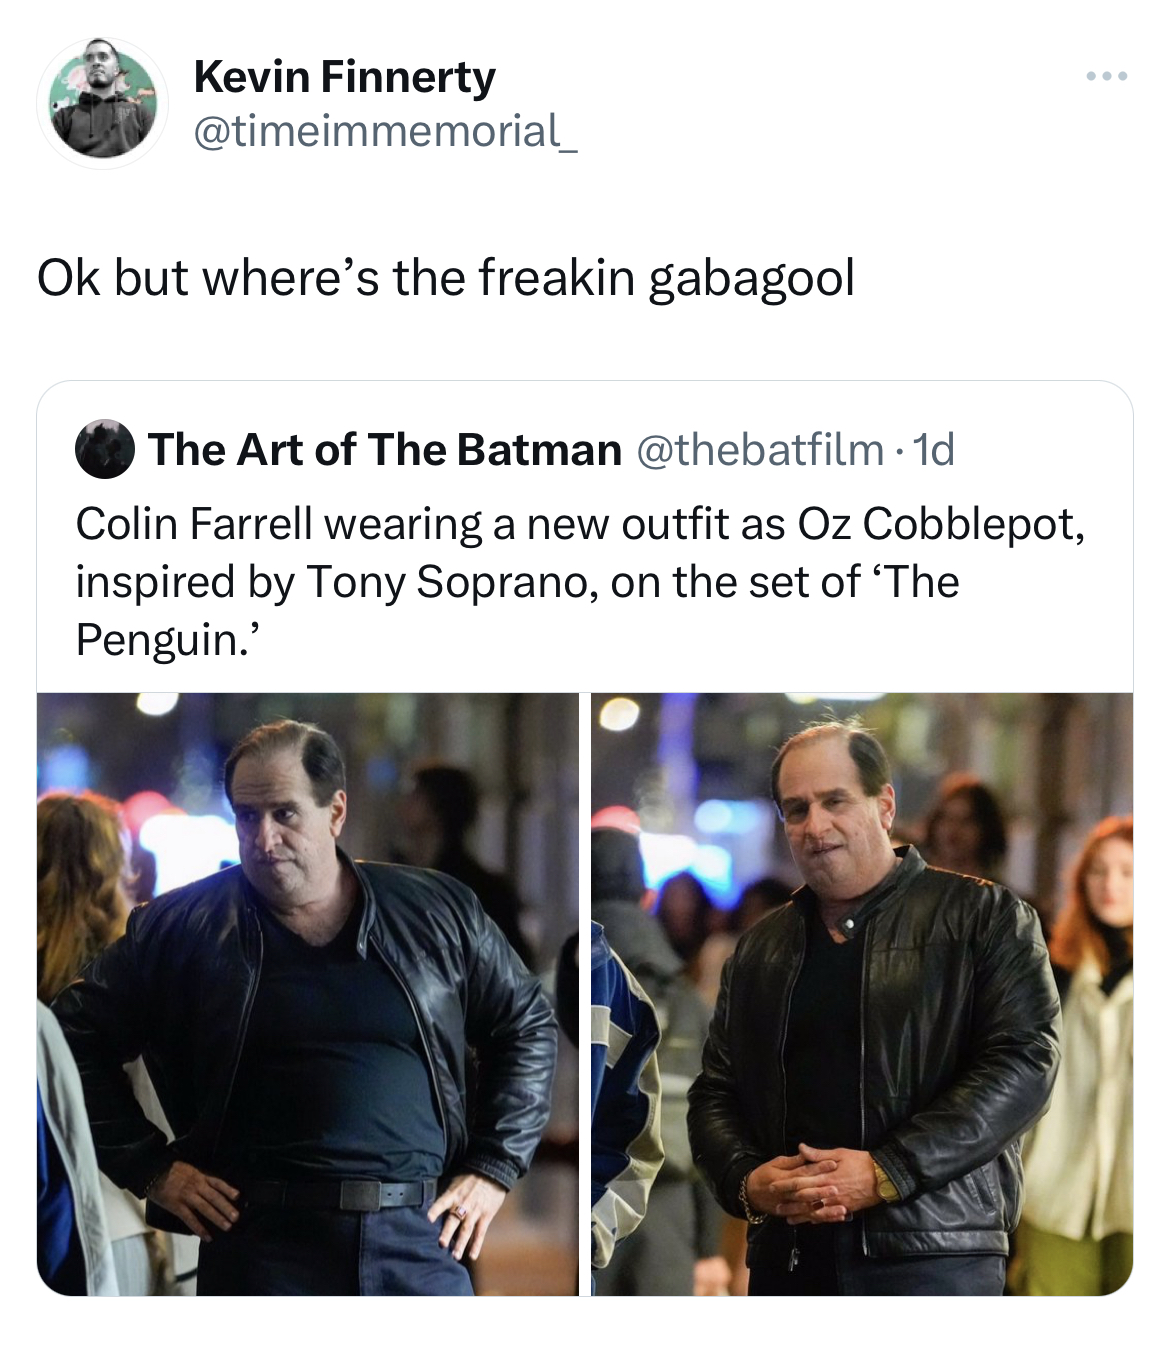 savage tweets roasting celebs - conversation - Kevin Finnerty Ok but where's the freakin gabagool The Art of The Batman Colin Farrell wearing a new outfit as Oz Cobblepot, inspired by Tony Soprano, on the set of 'The Penguin.' W